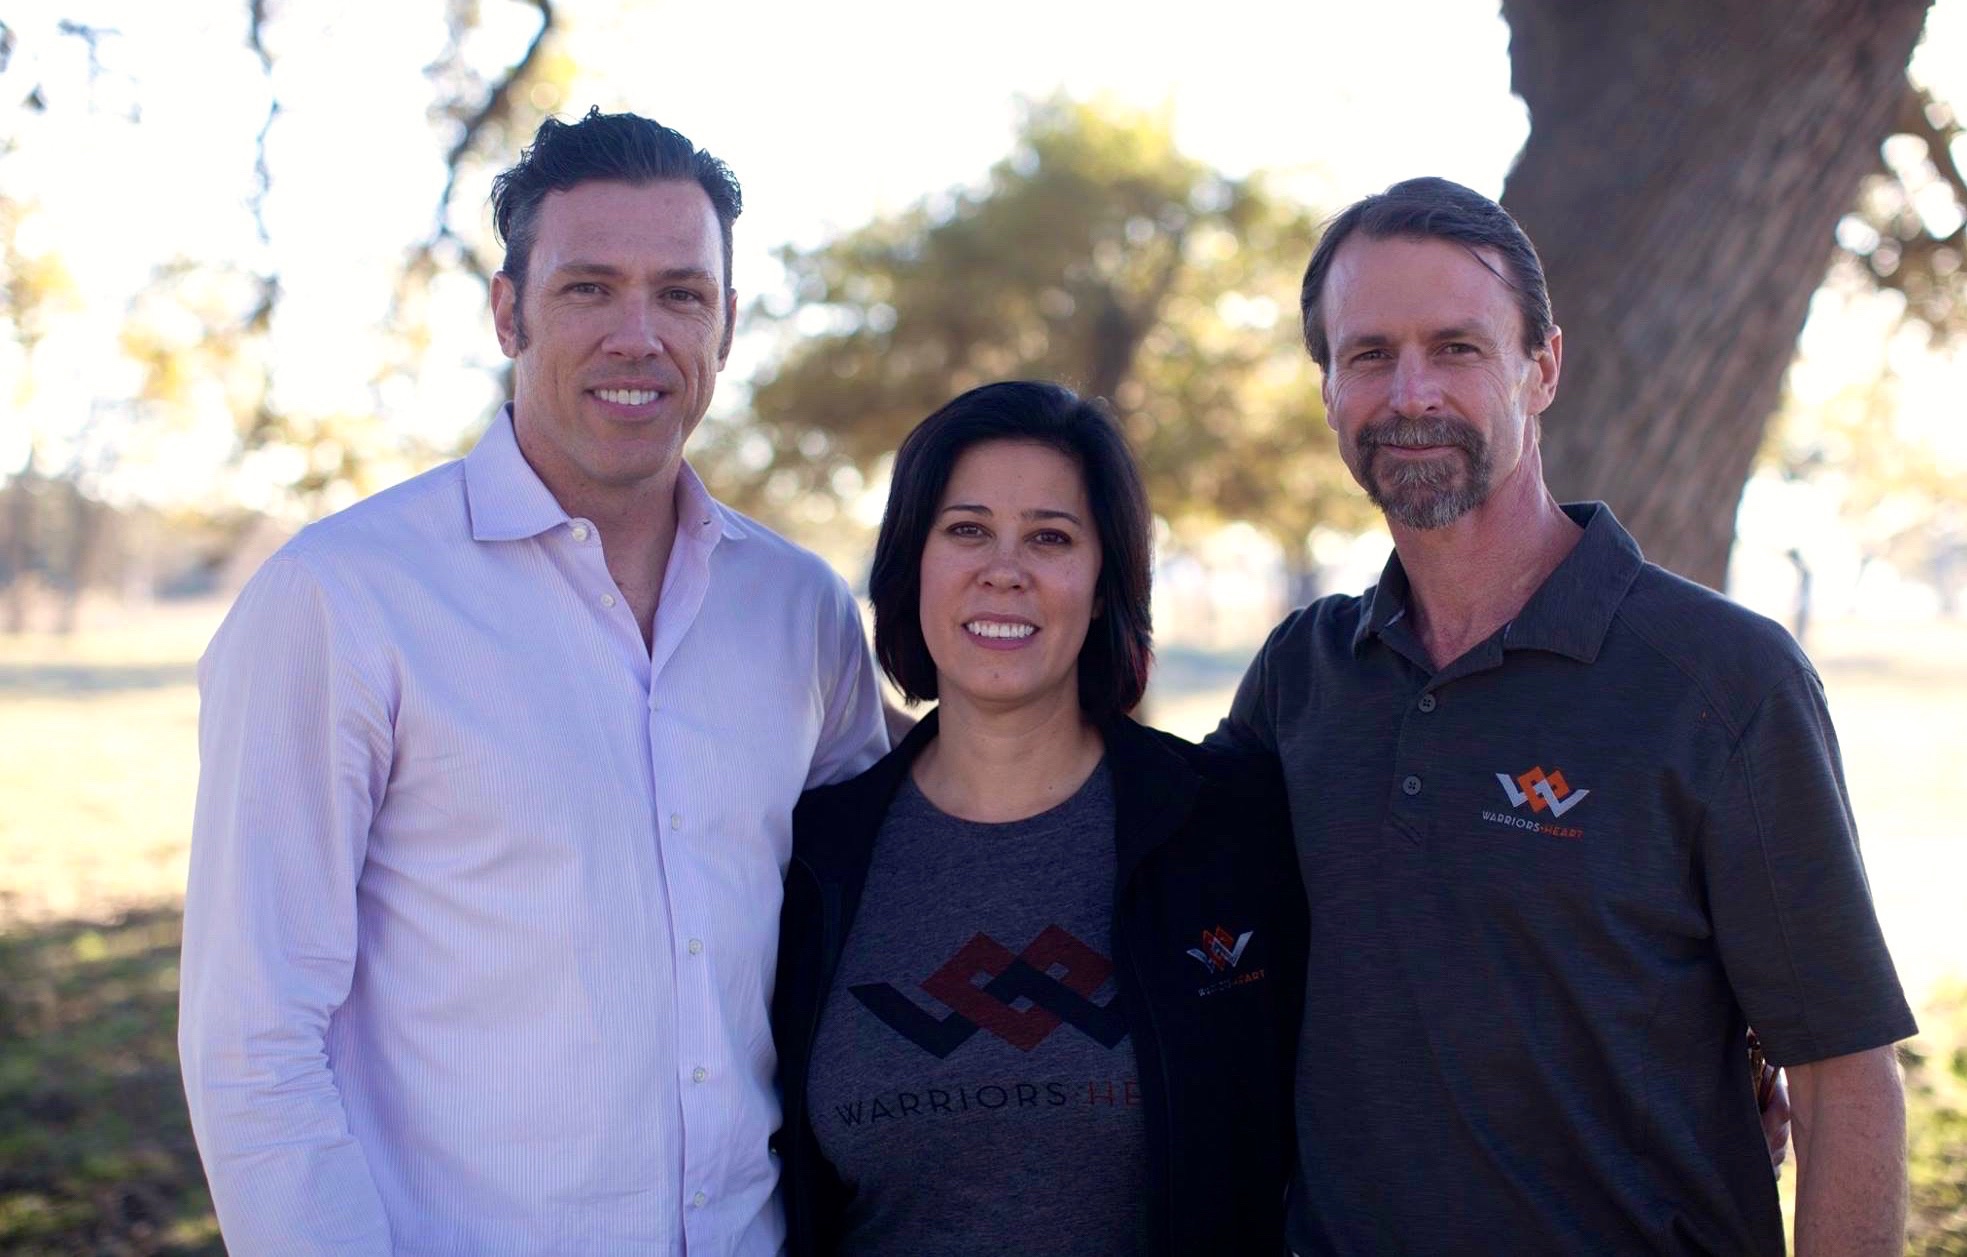 Warriors Heart Founders L to R: Former Special Forces Tom Spooner, Former Law Enforcement Officer Lisa Lannon, and CEO/President Josh Lannon